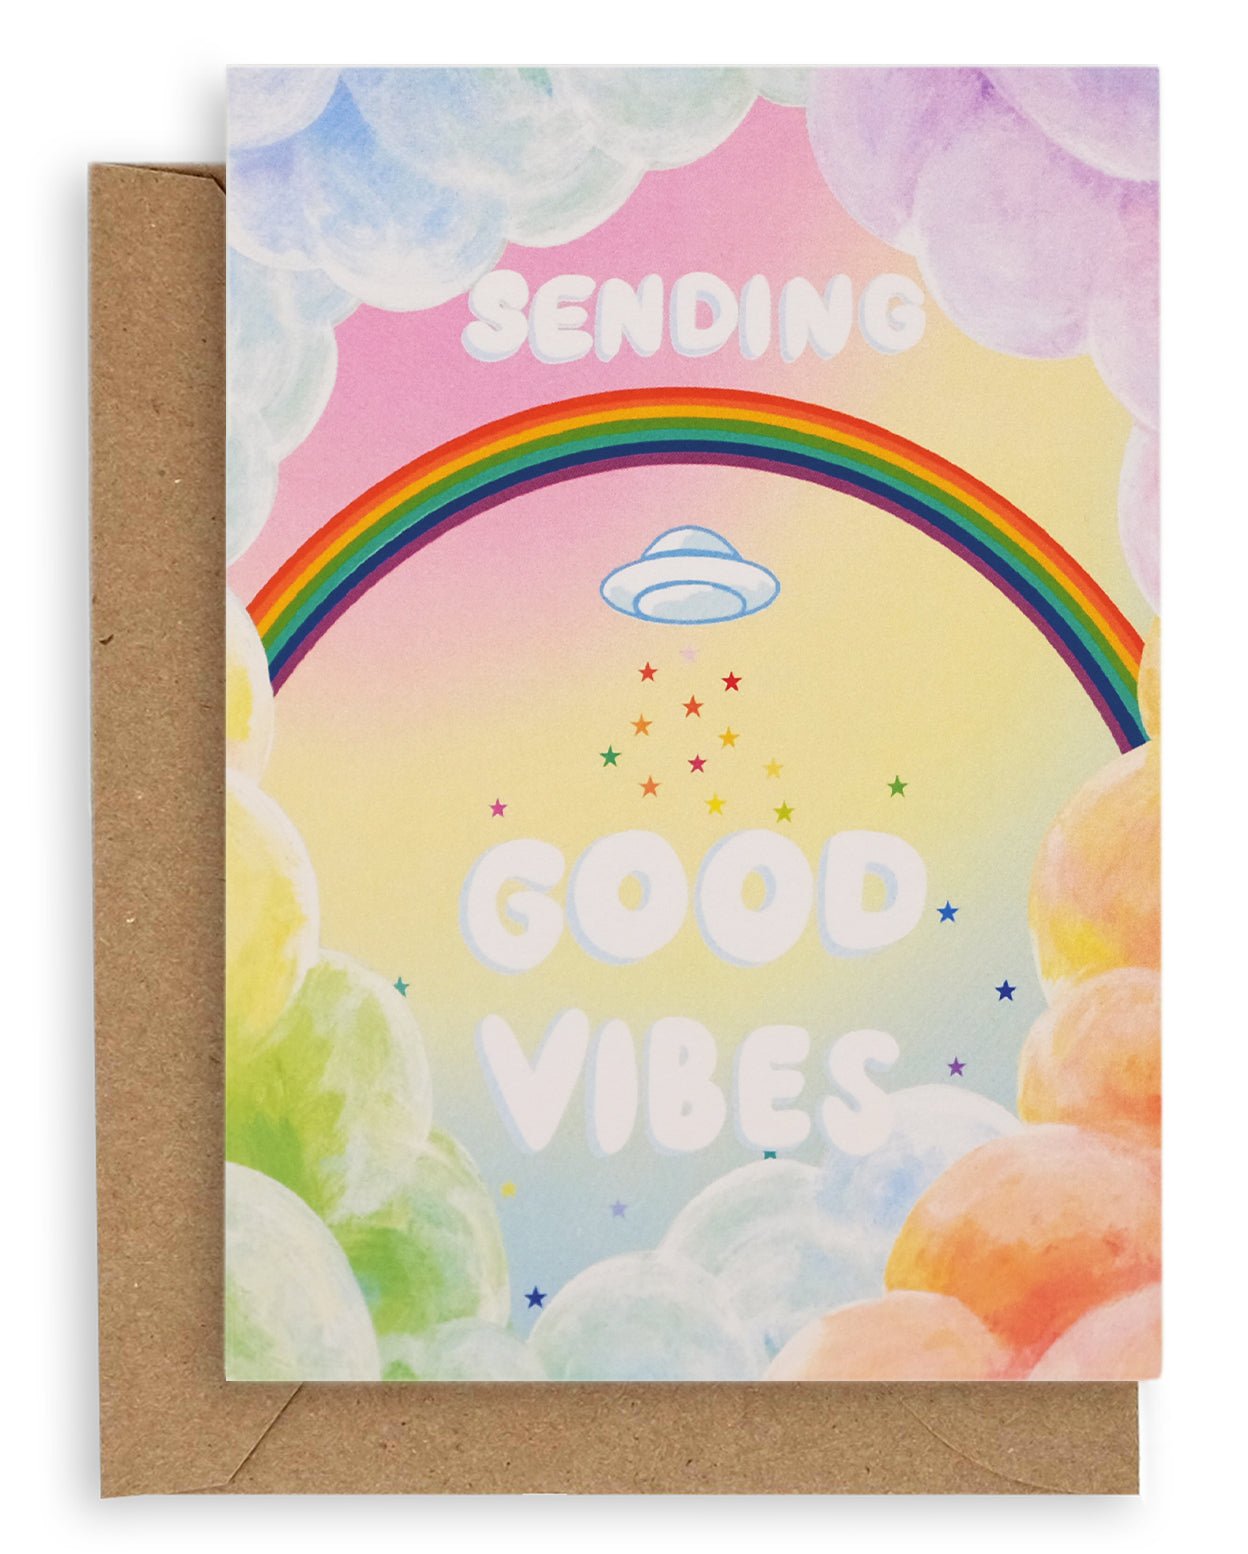 Colorful greeting card with cumulus clouds surrounding a rainbow with a UFO below it, followed by rainbow stars and clouds, and the words "Sending Good Vibes" on the front. Shown with a brown kraft paper envelope.